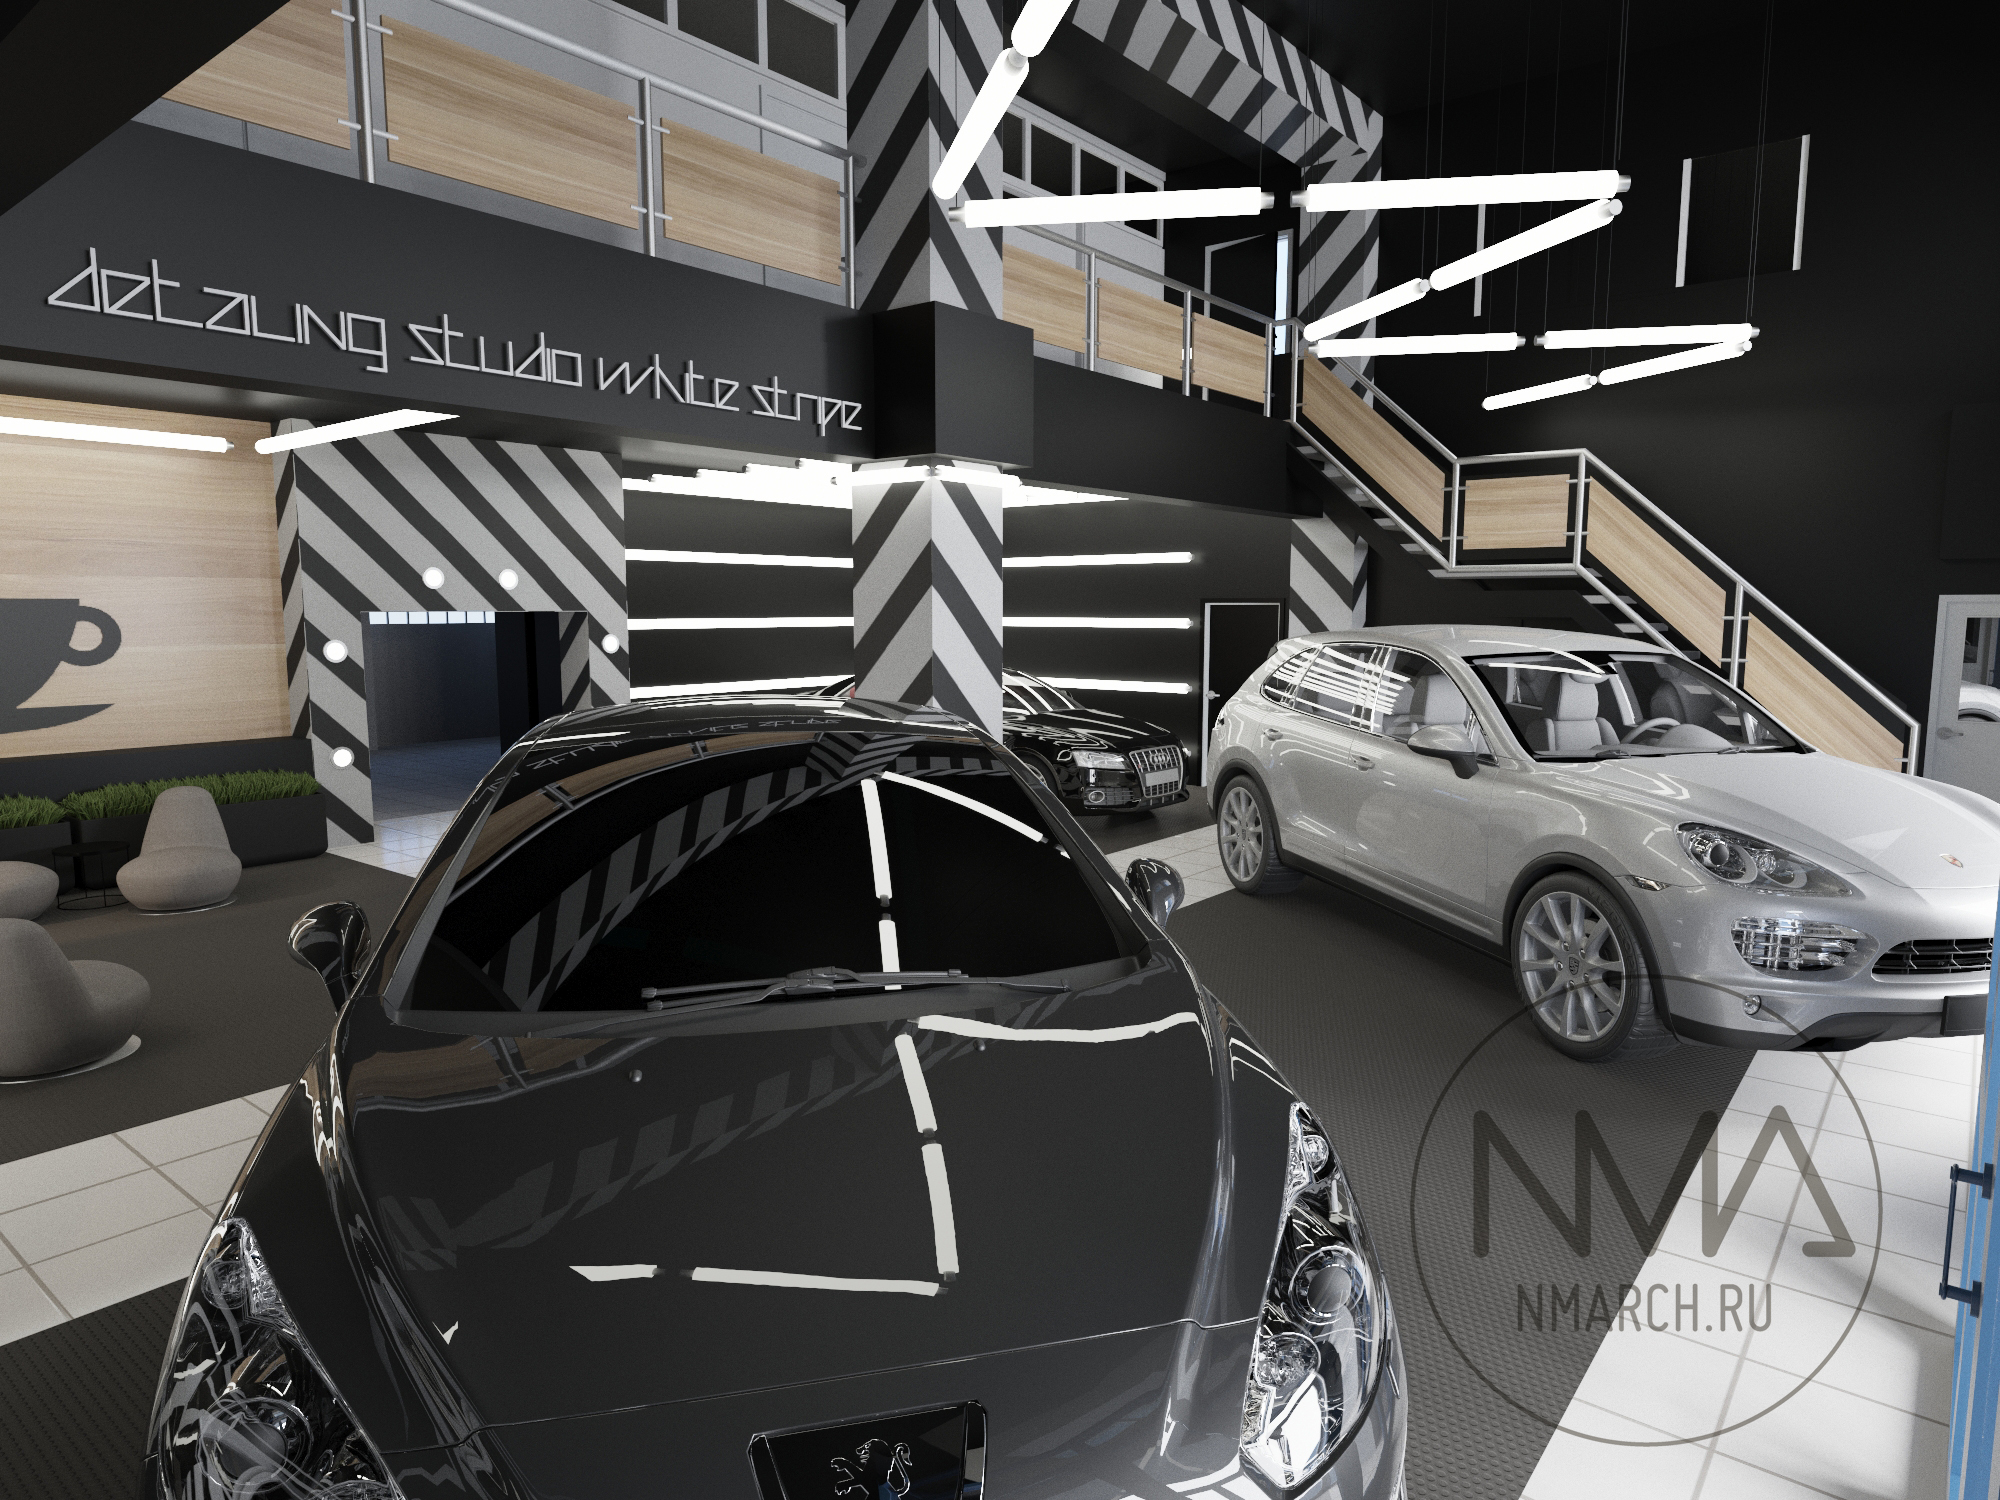 The concept of a car showroom